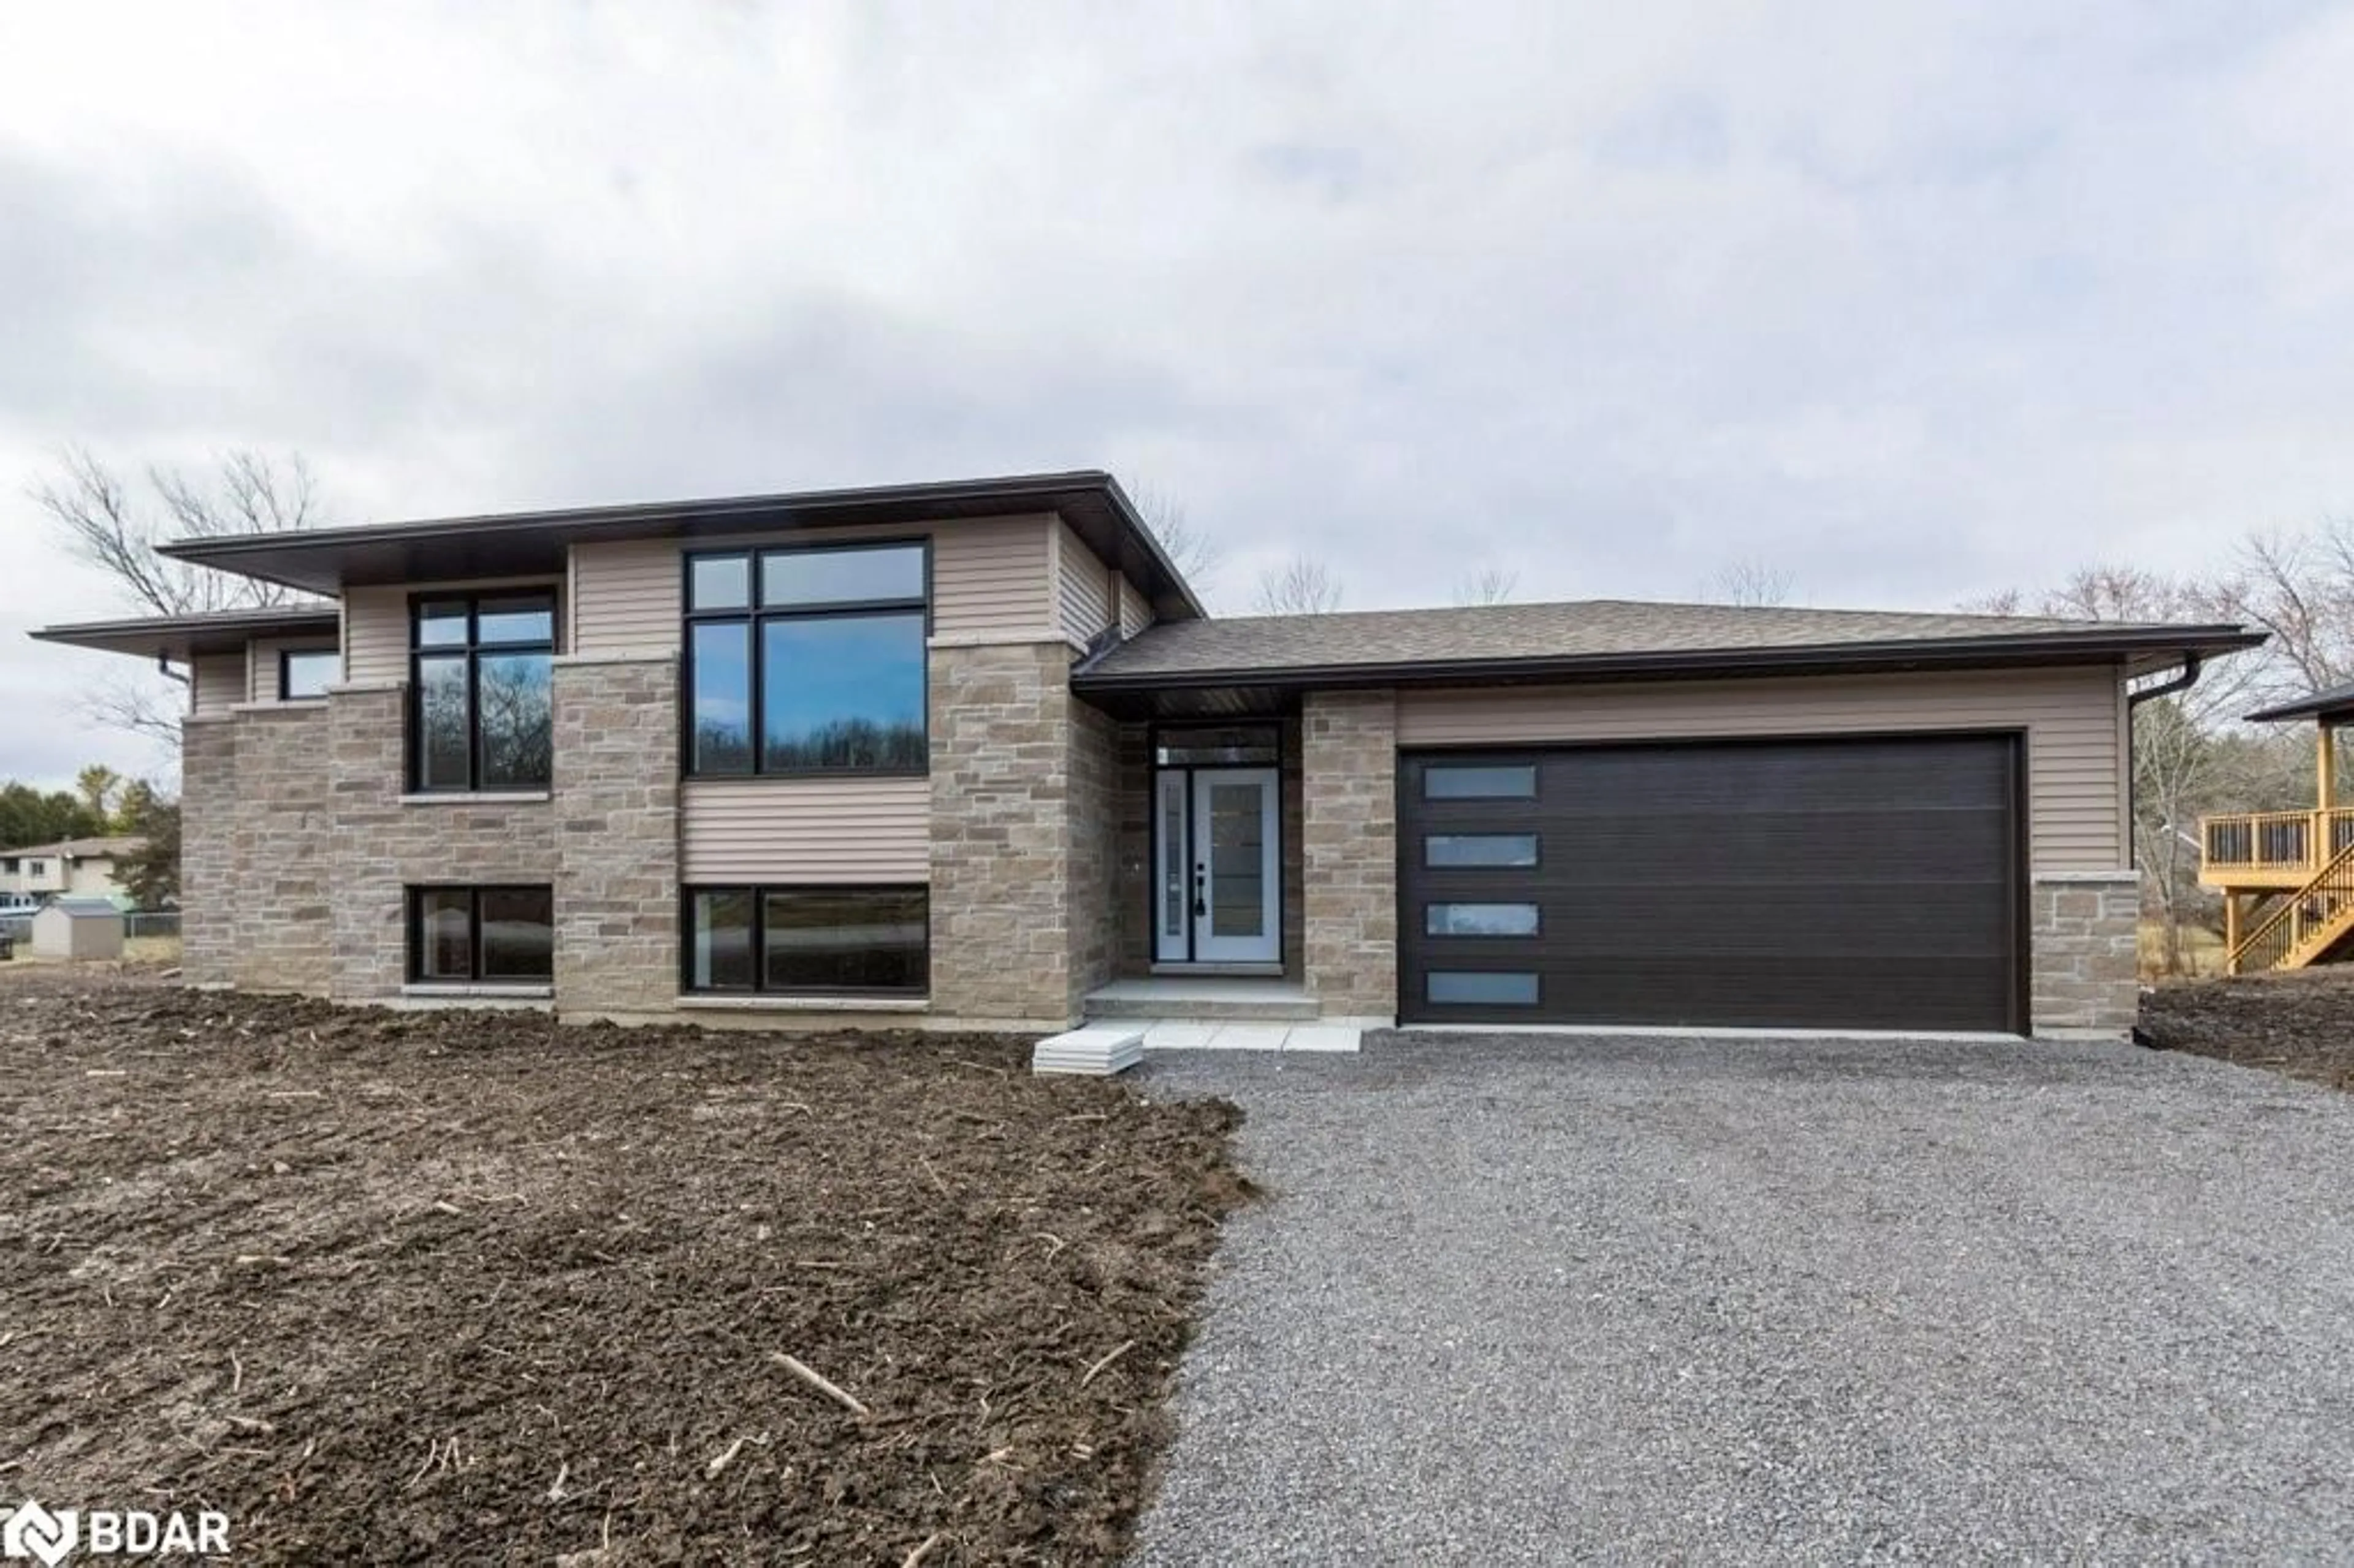 Home with brick exterior material for 150 Michael's Way, Prince Edward County Ontario K0K 1L0